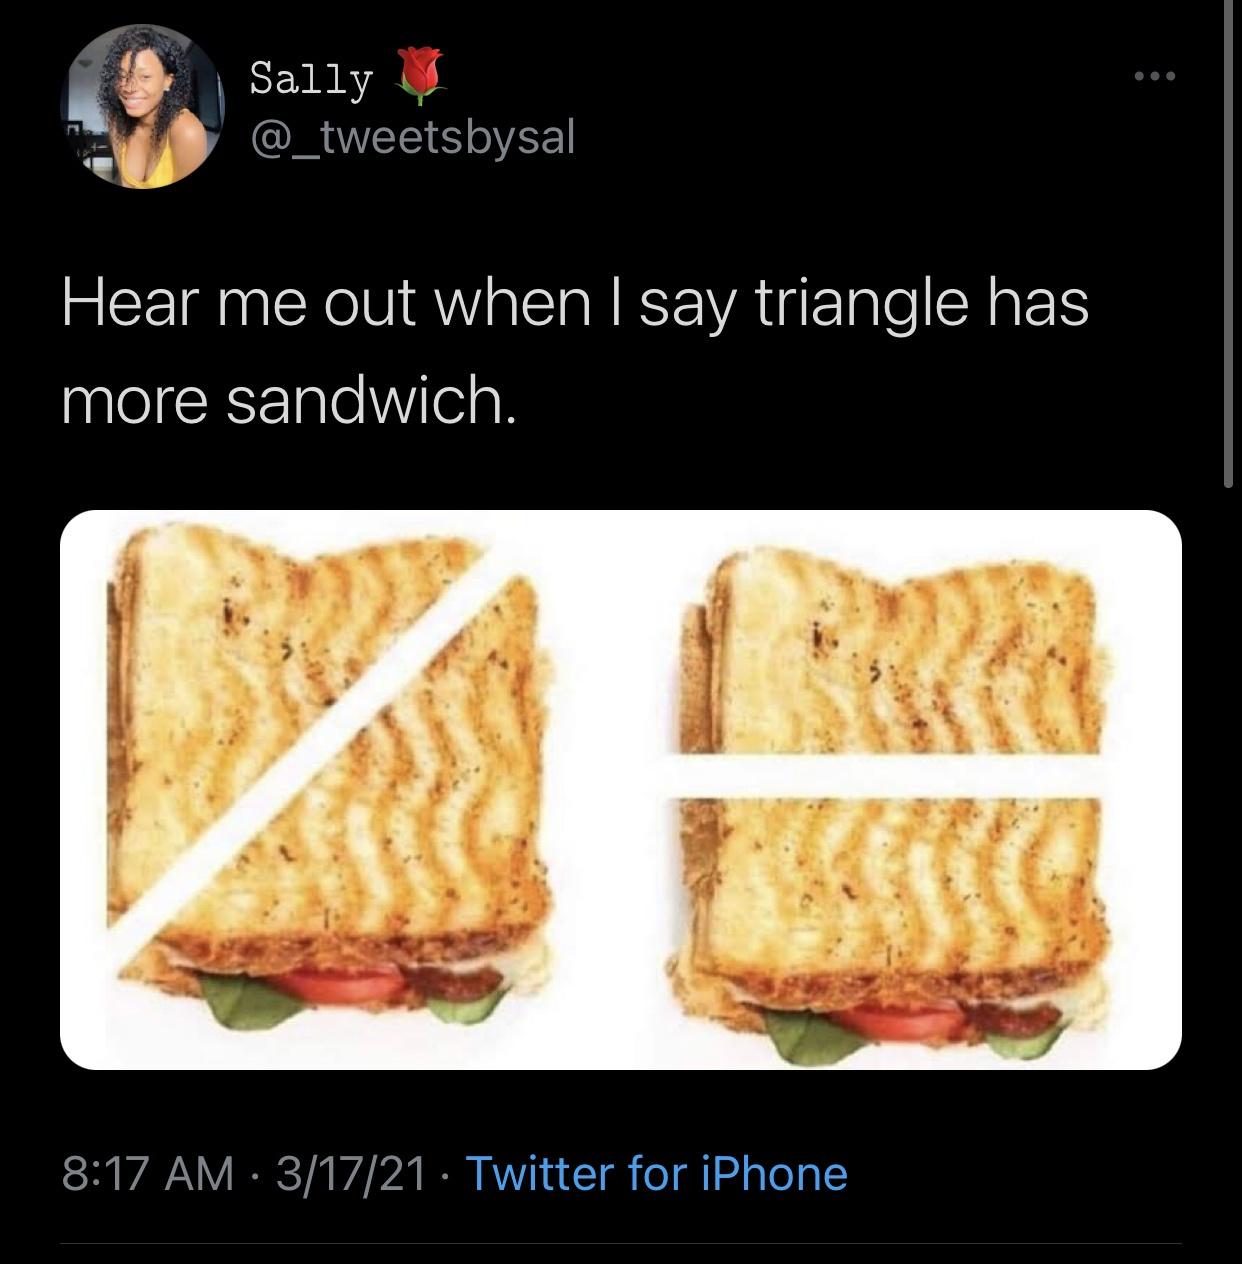 junk food - Sally Hear me out when I say triangle has more sandwich. 31721 Twitter for iPhone